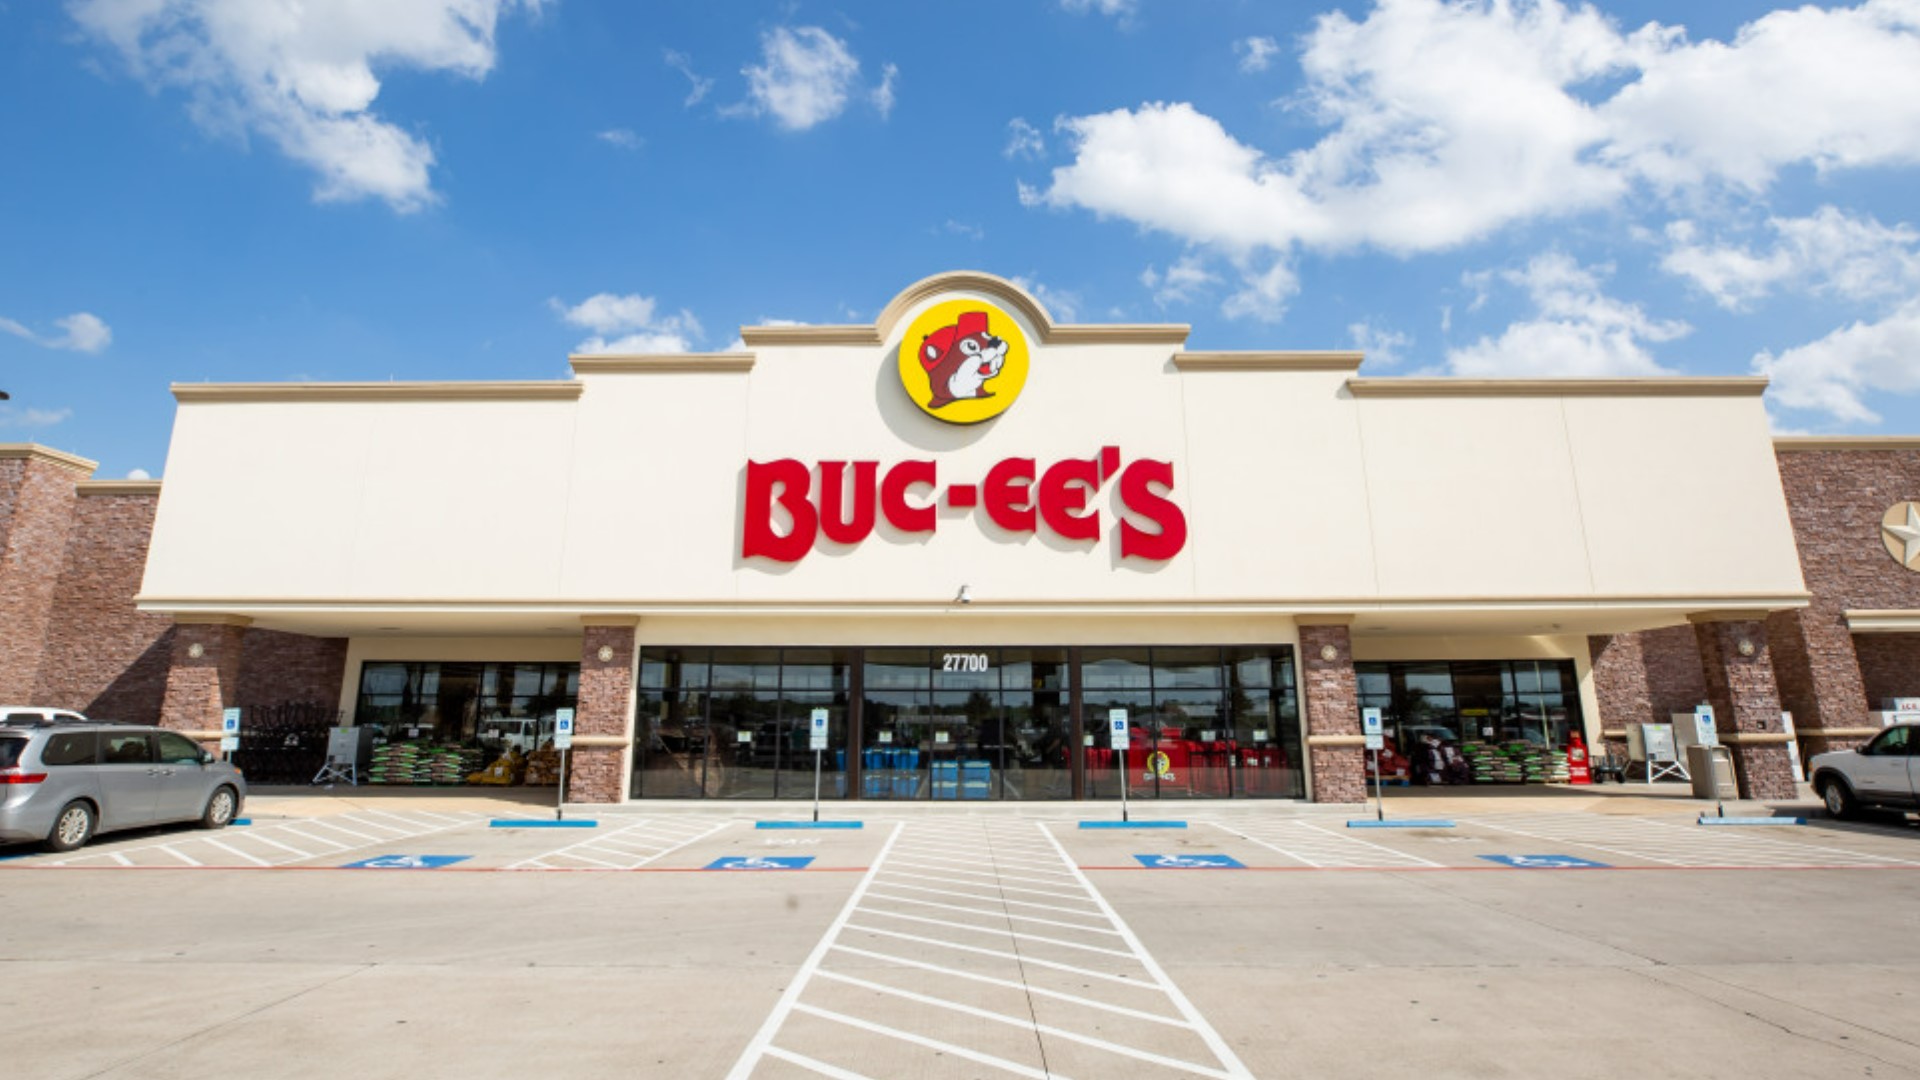 Luling already had a Buc-ee's, but a new 75,000-square-foot location will replace it.